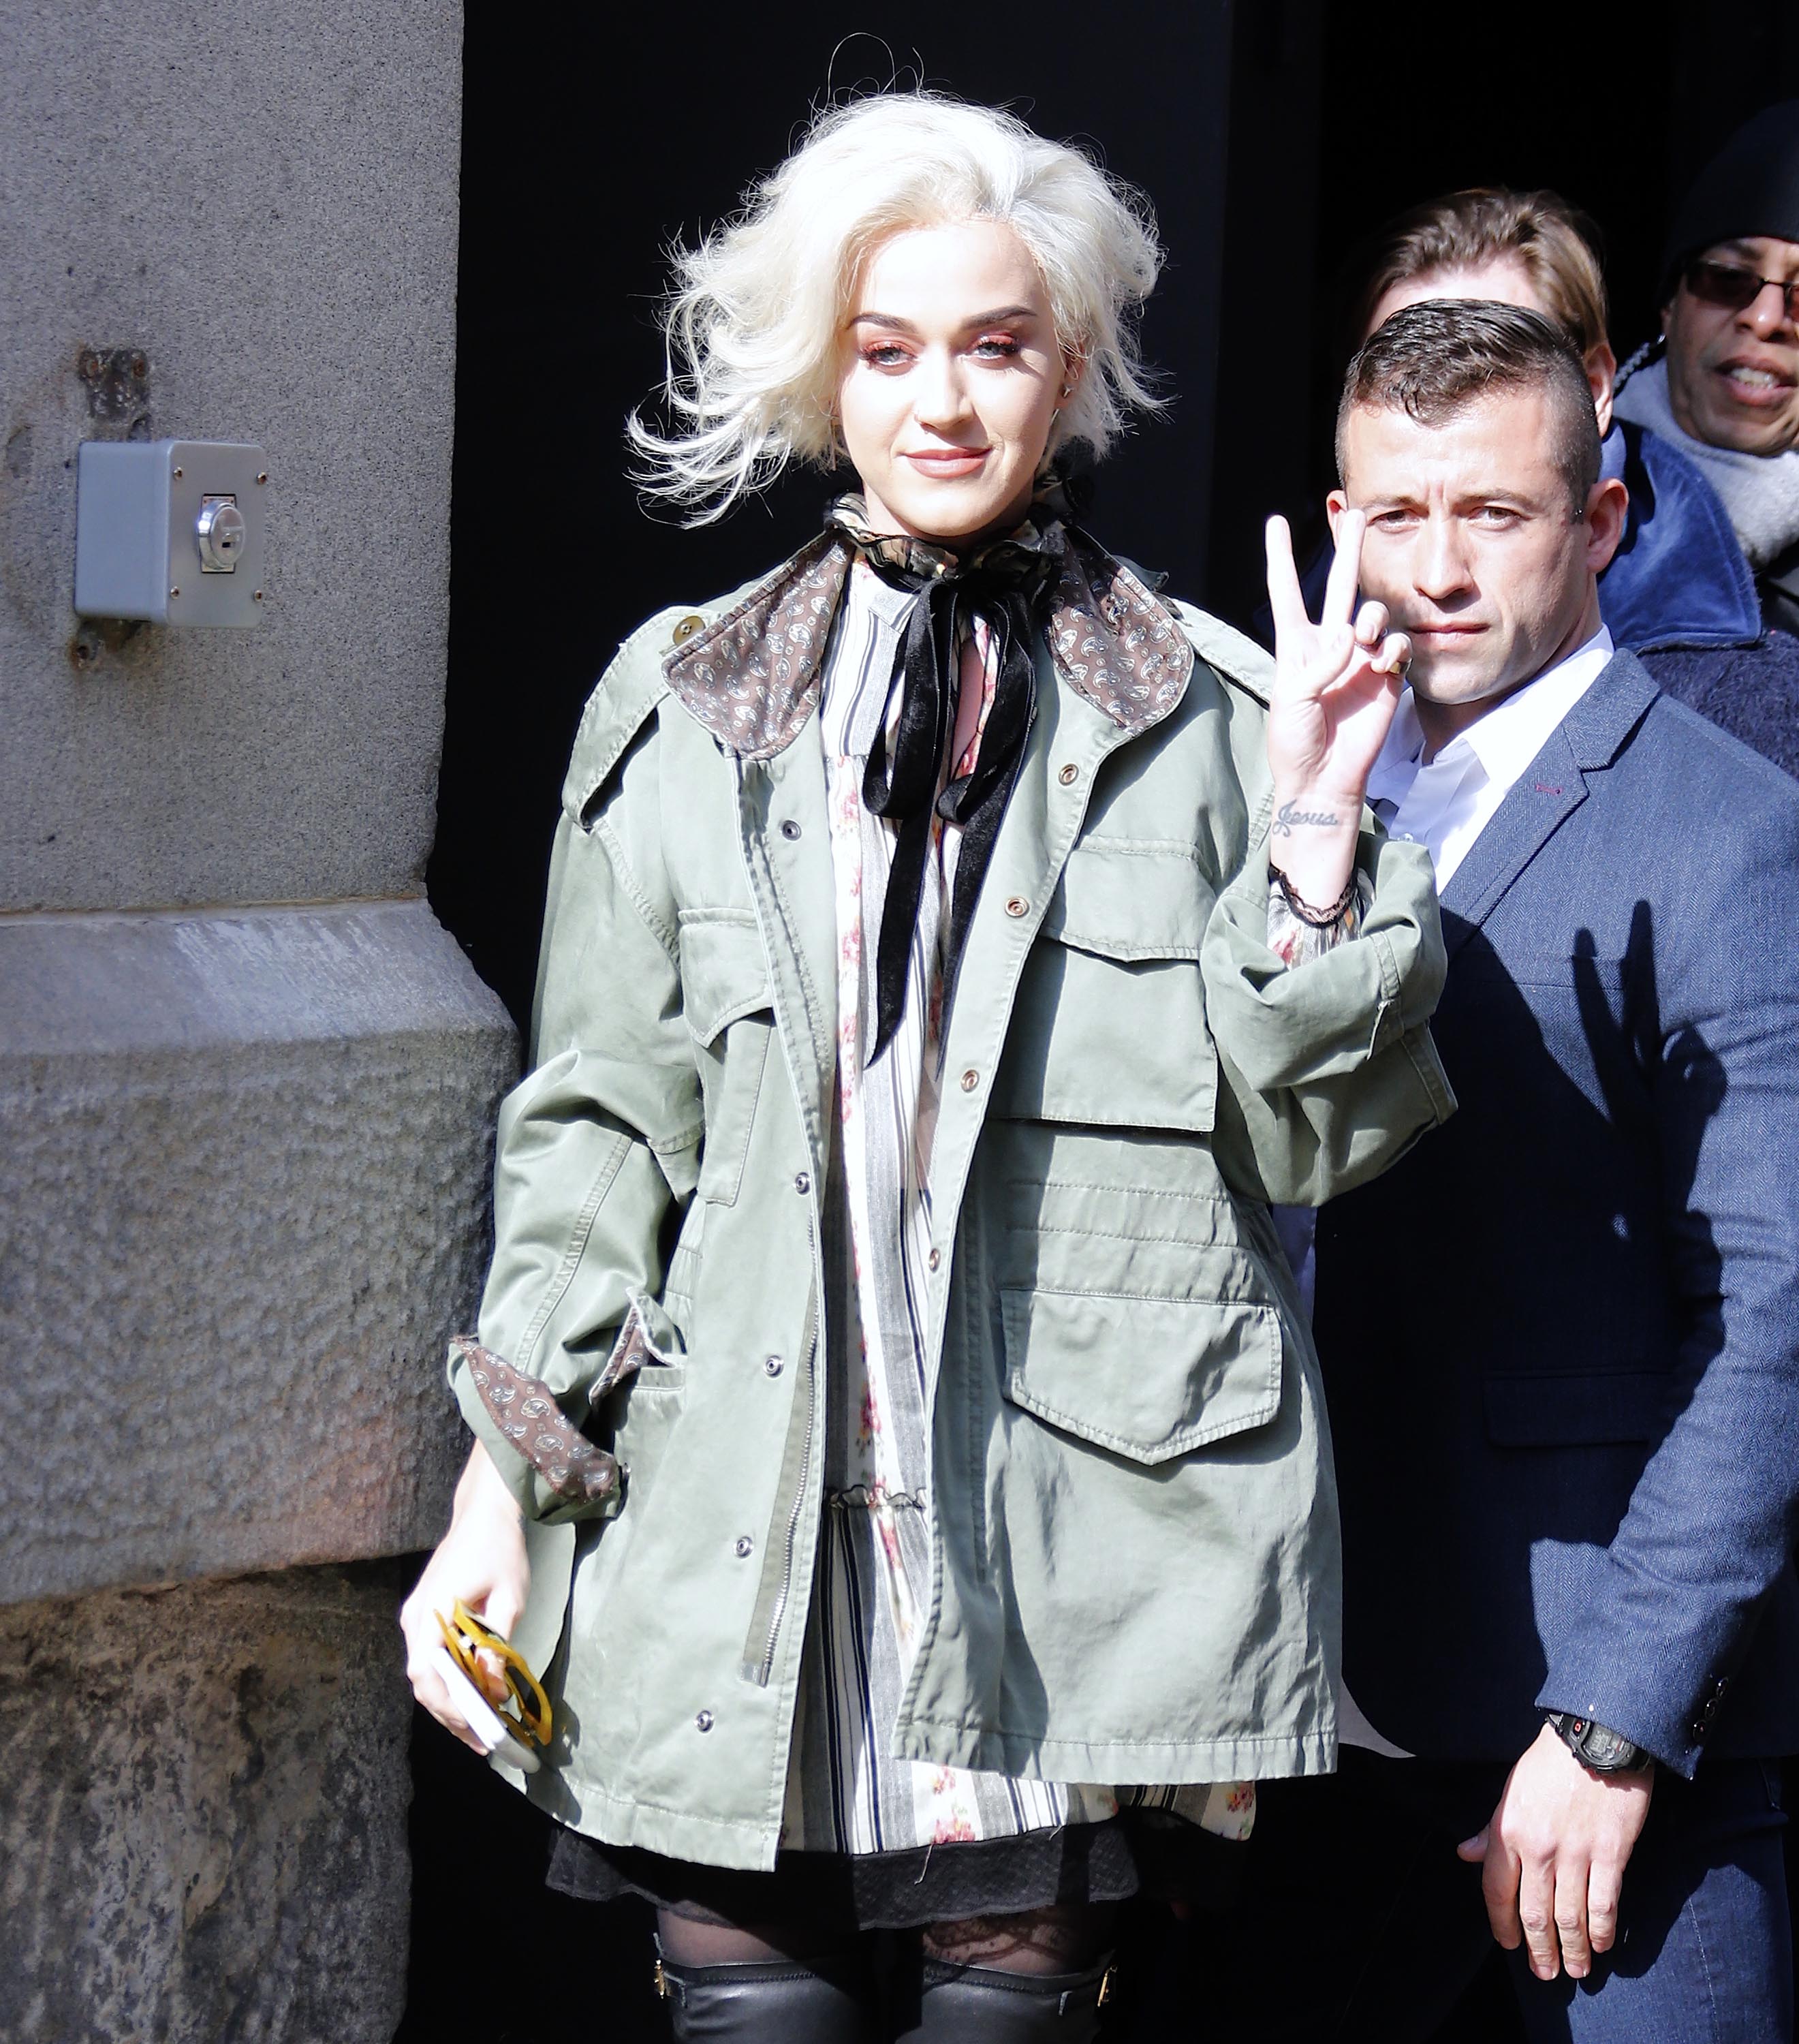 Katy Perry attends Marc Jacobs Fashion Show